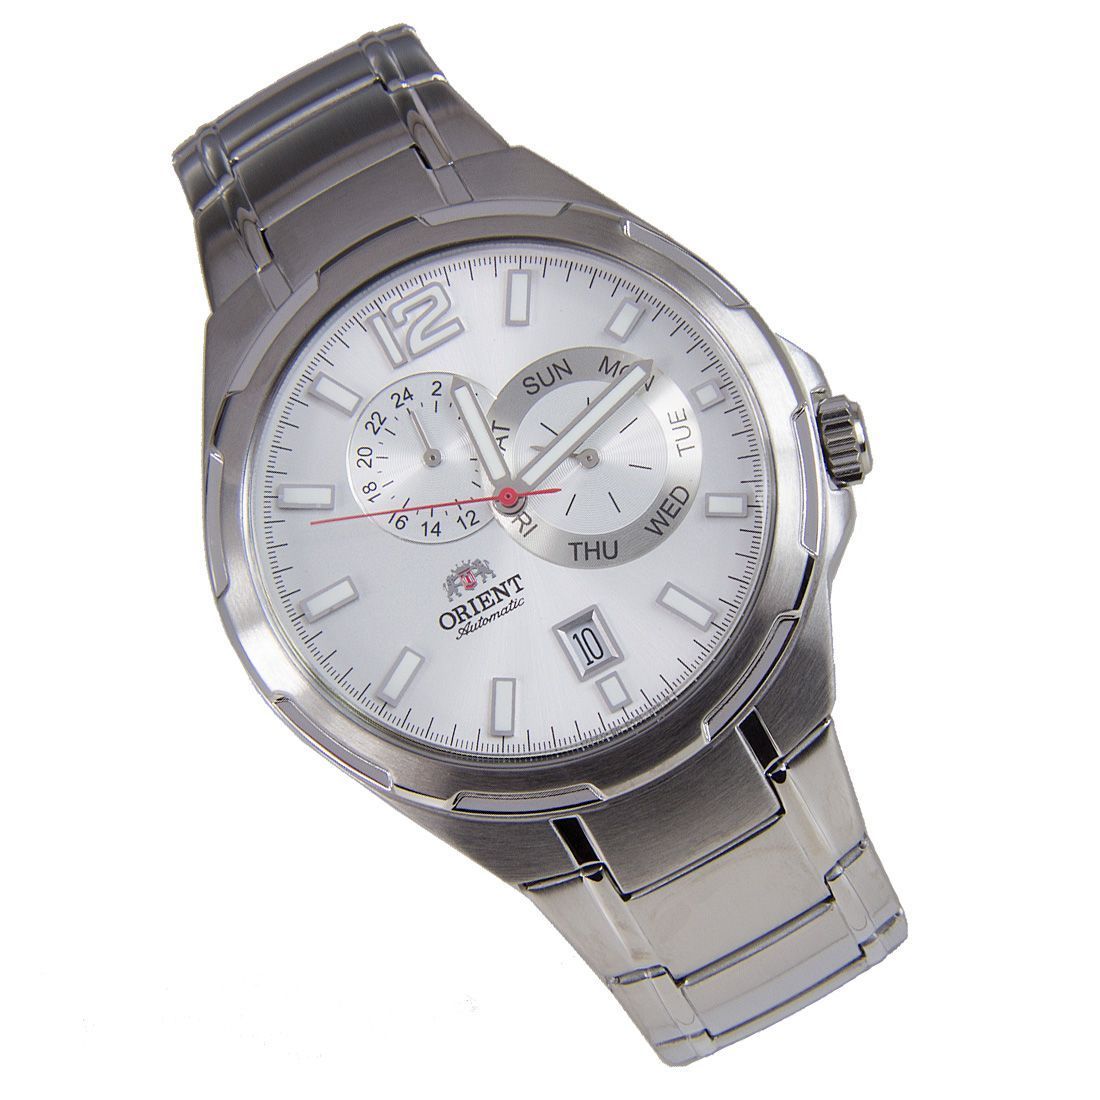 Orient Mechanical ET0L002W Silver Analog Sub Dial Stainless Steel Watch -Orient